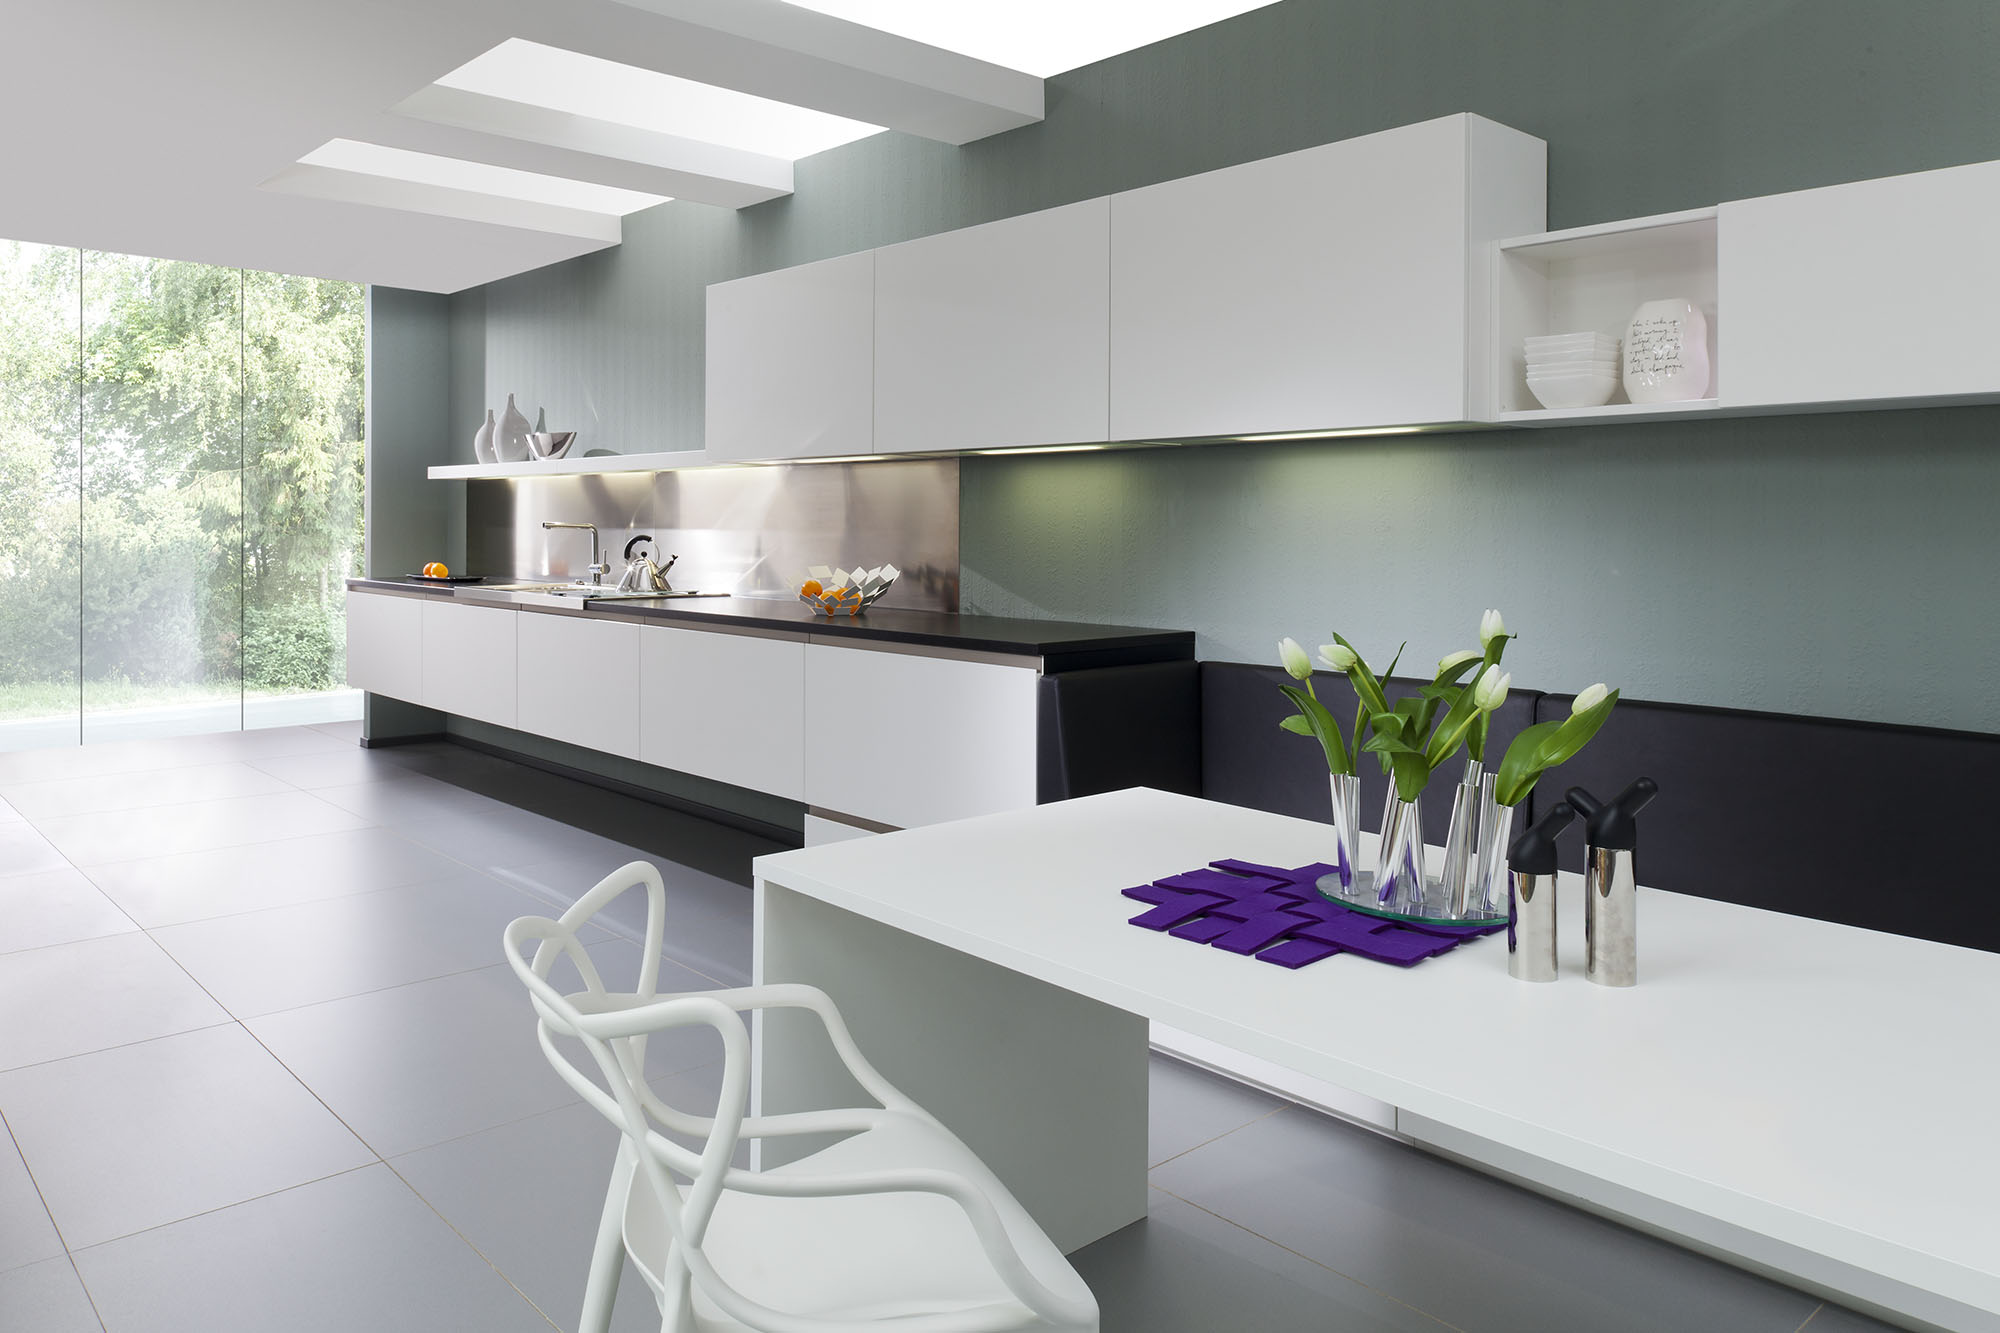 Gloss or Matt Kitchens: How to Decide Which Is Best for You and Your Home